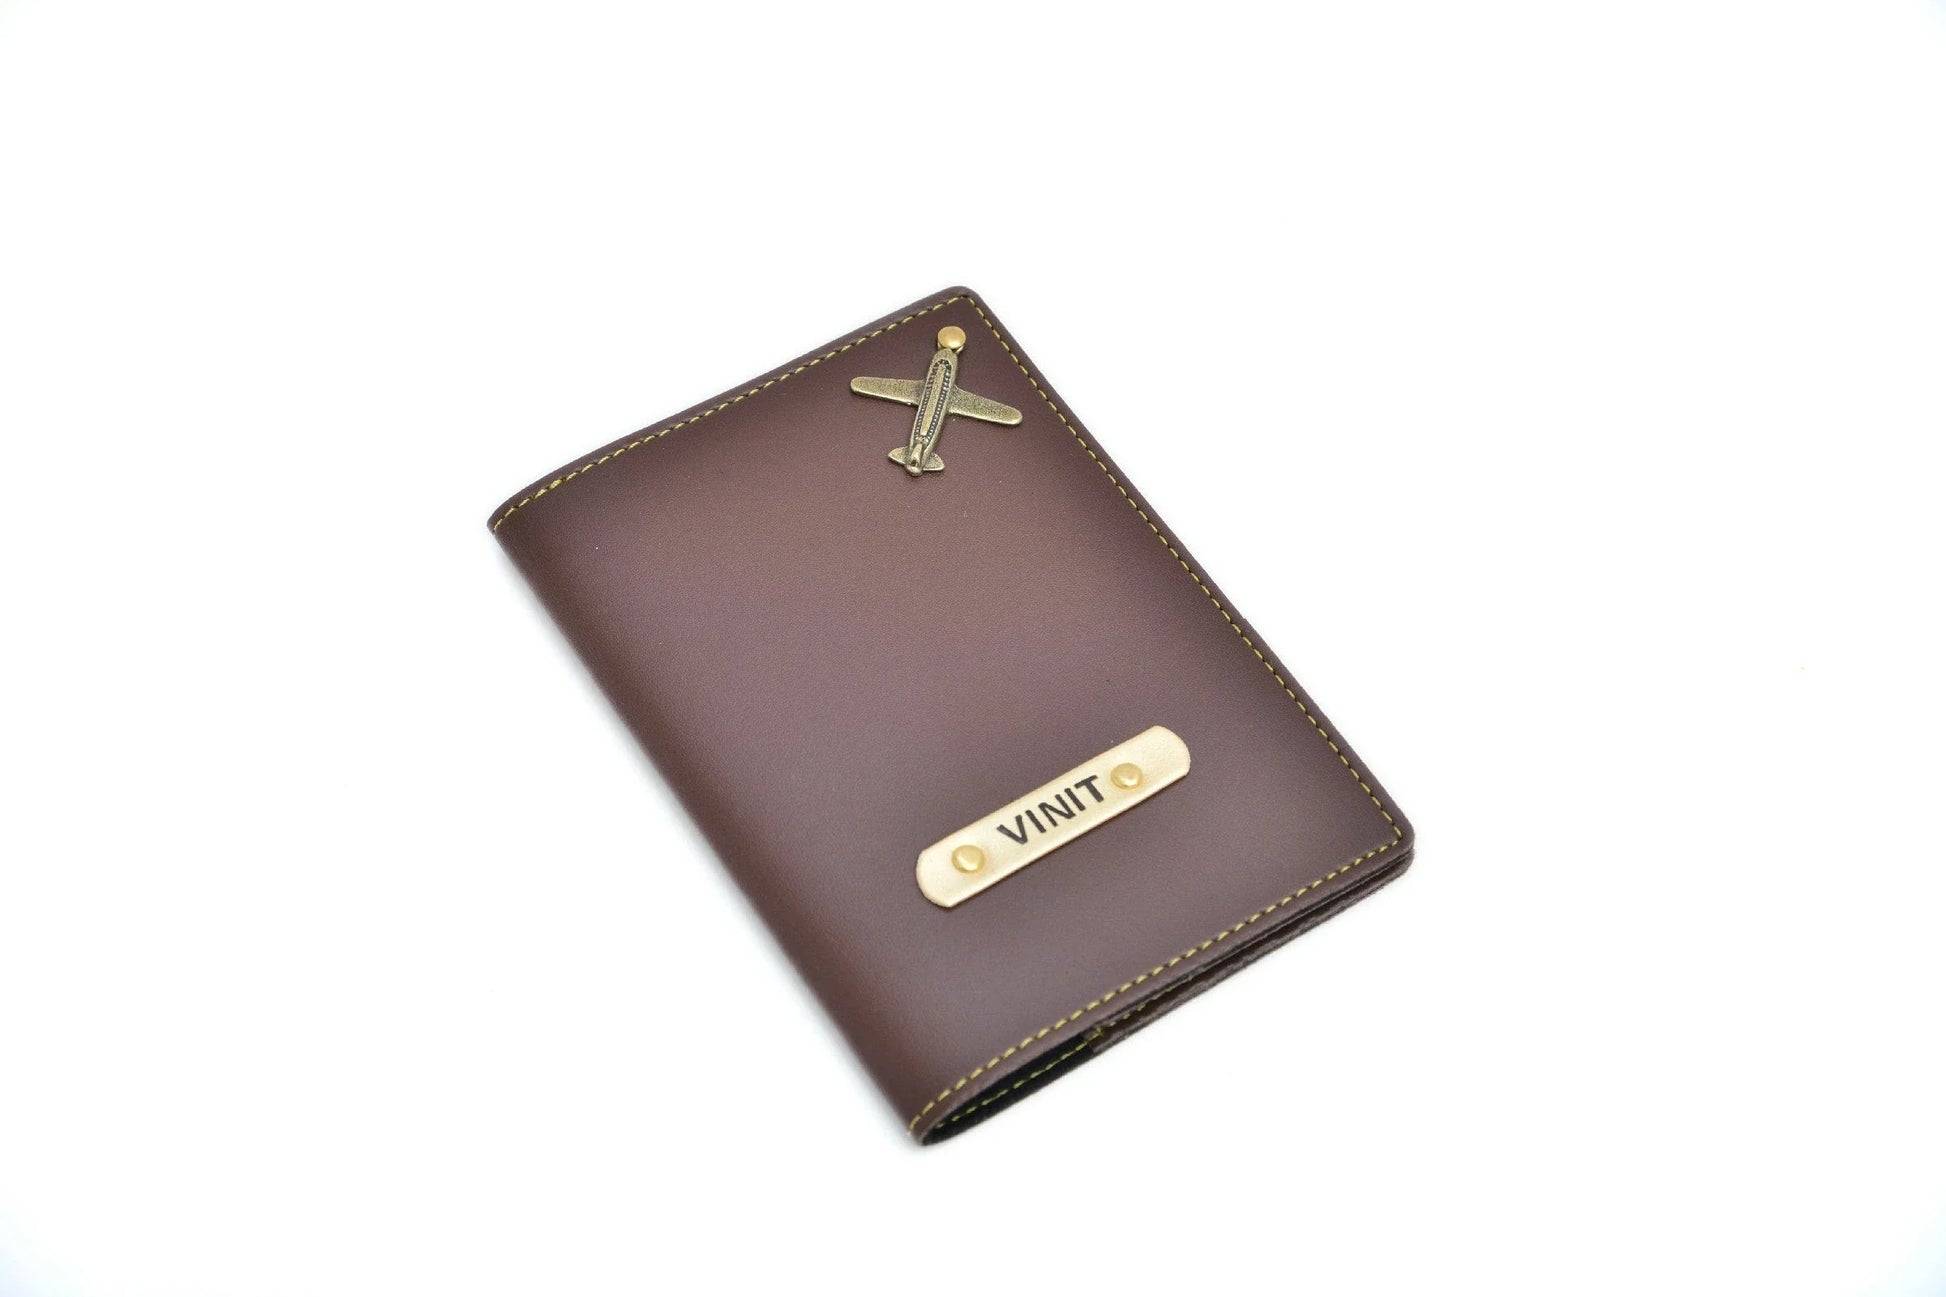 personalized-passport-cover-brown-customized-best-gift-for-boyfriend-girlfriend. Quality Eco Friendly Faux leather Protector Wallet Holder. Our Passport covers are strong and durable for all your flights.